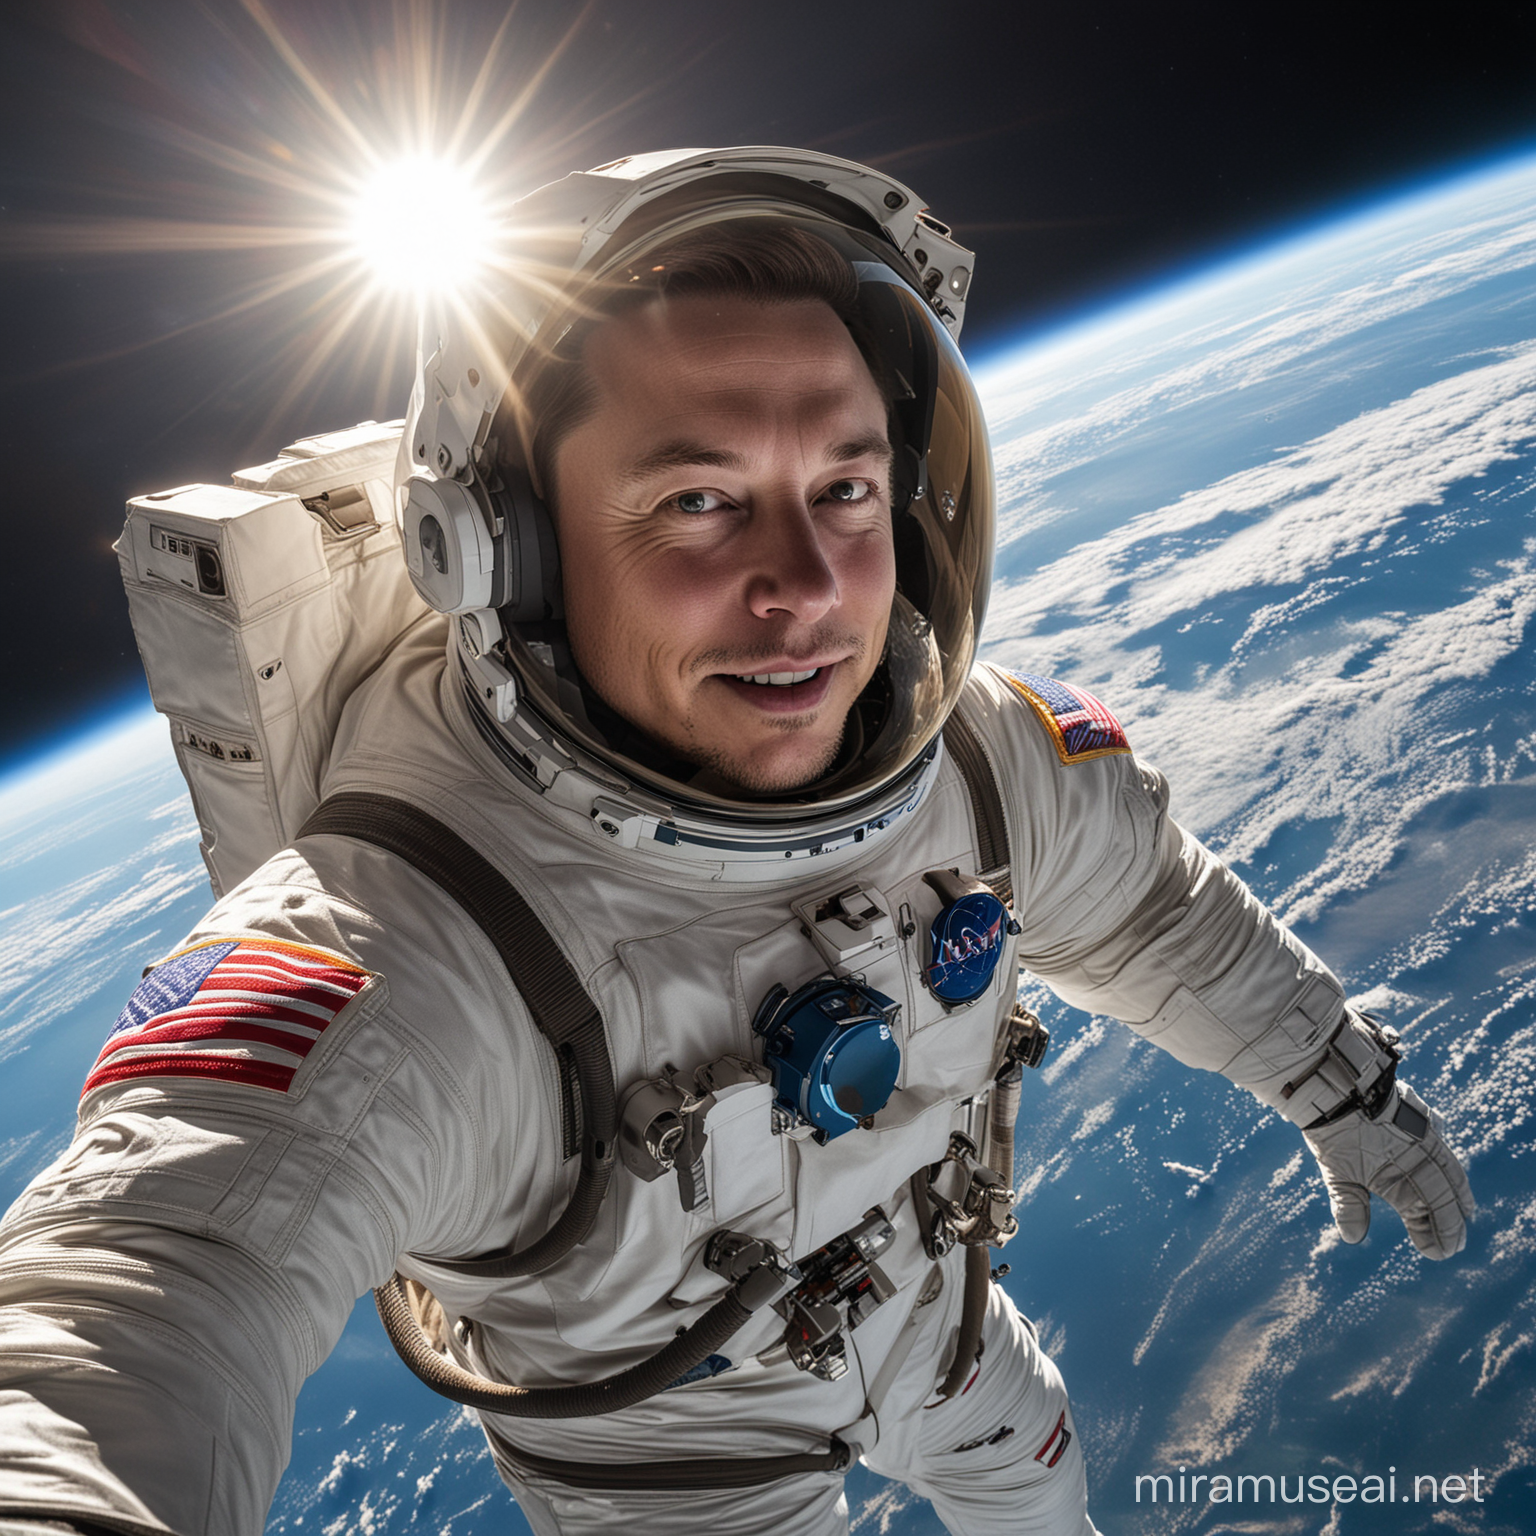 create image of elon musk in an NASA astronaut suit in outer space above the earth. he is wearing NASA helmet. 3/4 view, reflecting of sun on glass of his round helmet. NASA backpack. full body action. international space station is in background. He is looking at us. giving thumbs up